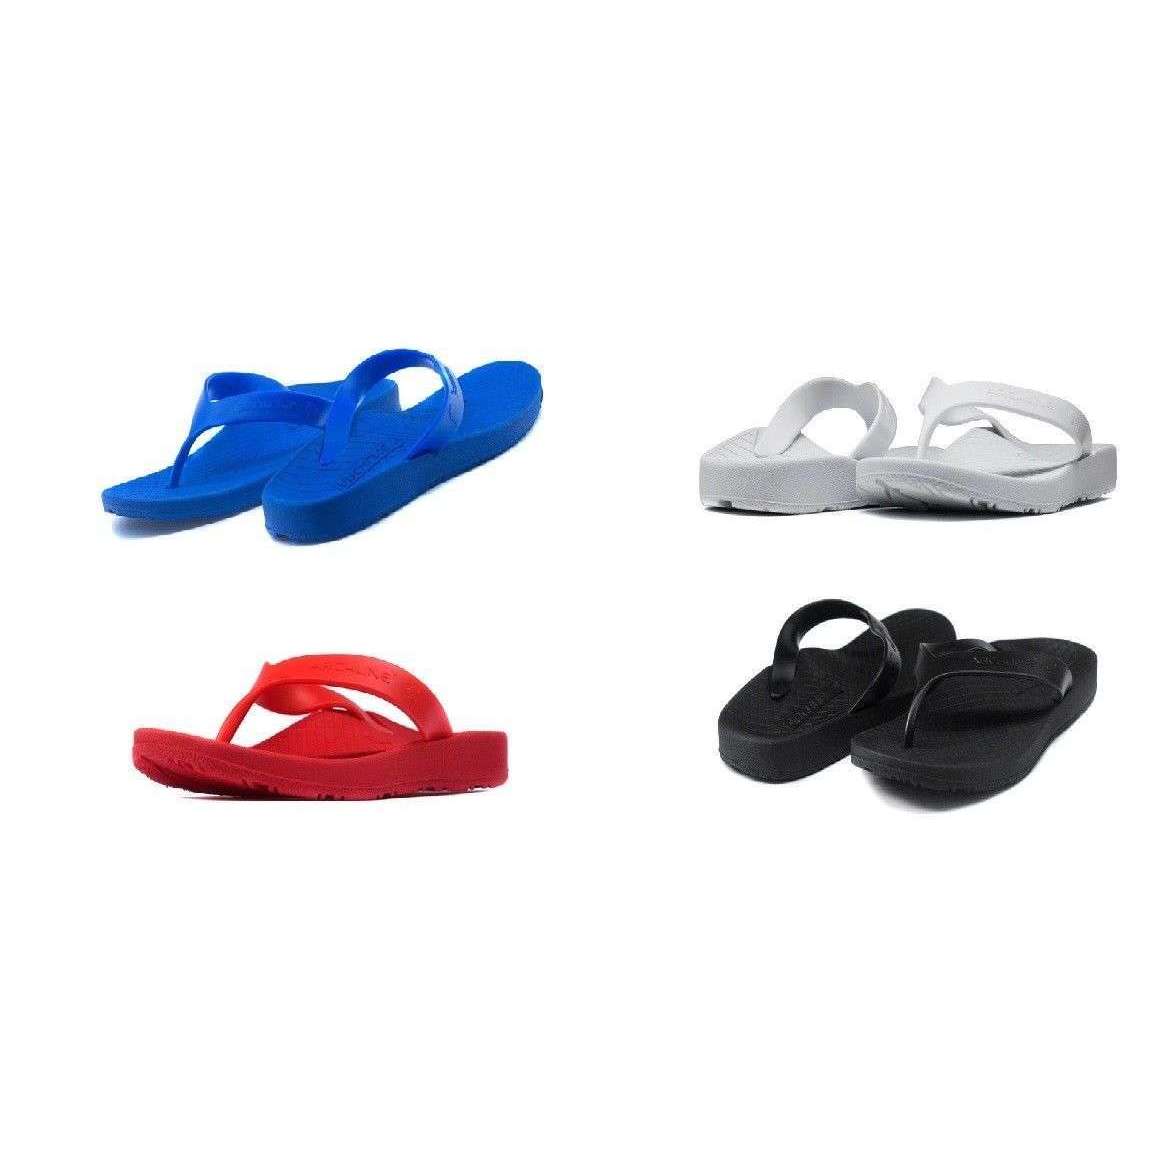 orthotic flip flops with arch support